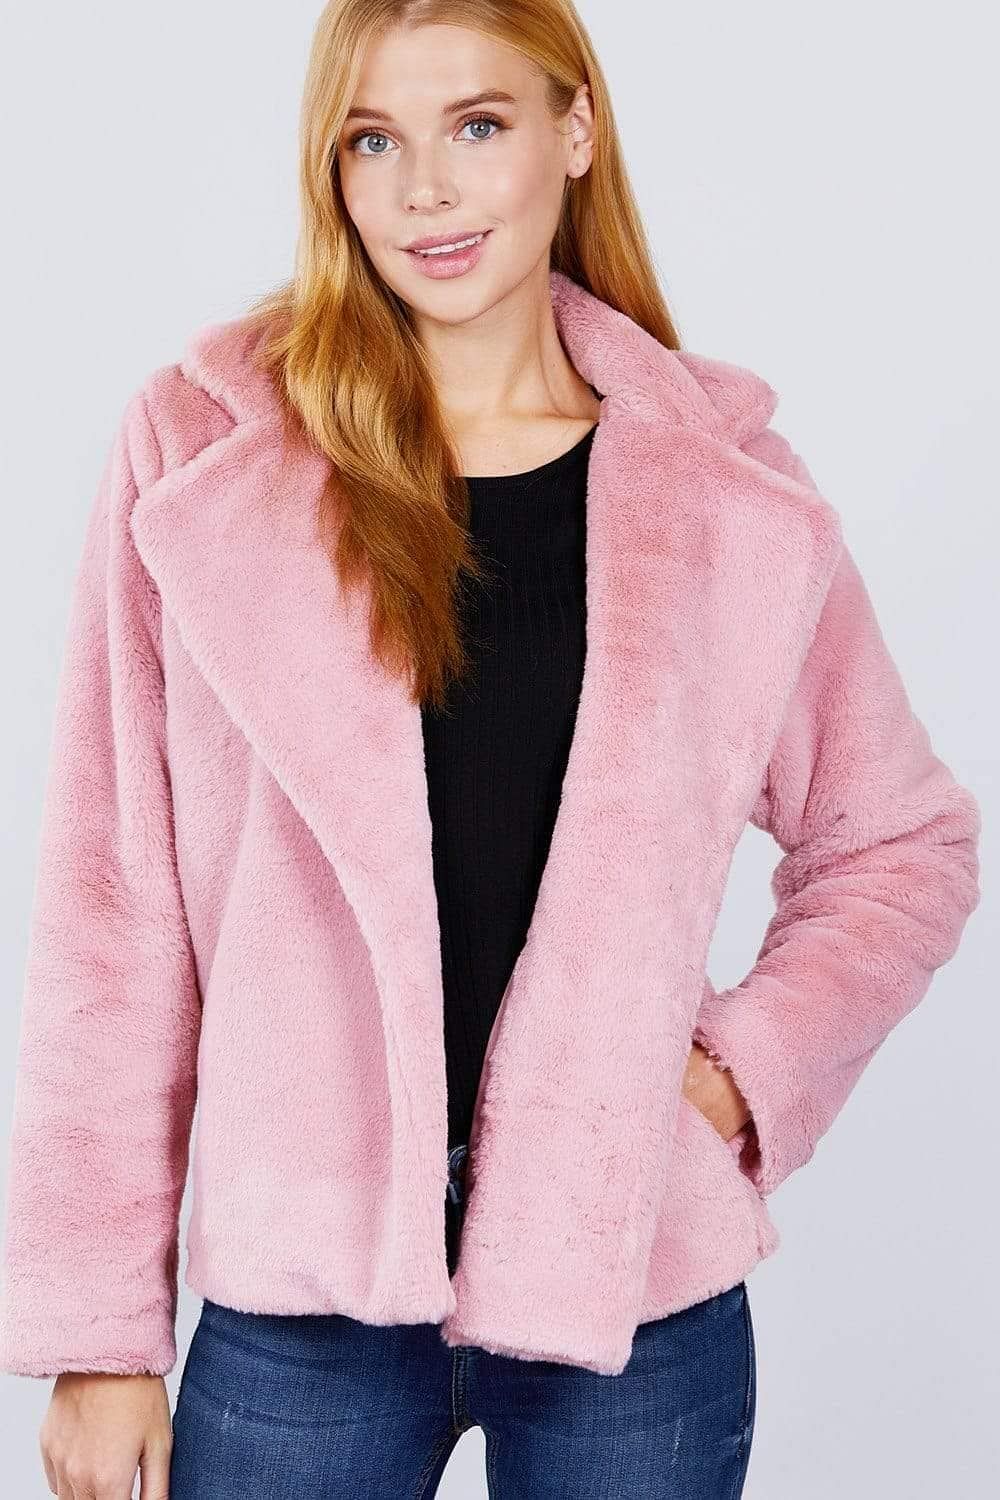 Pink Long Sleeve Faux Fur Jacket - Shopping Therapy, LLC jackets